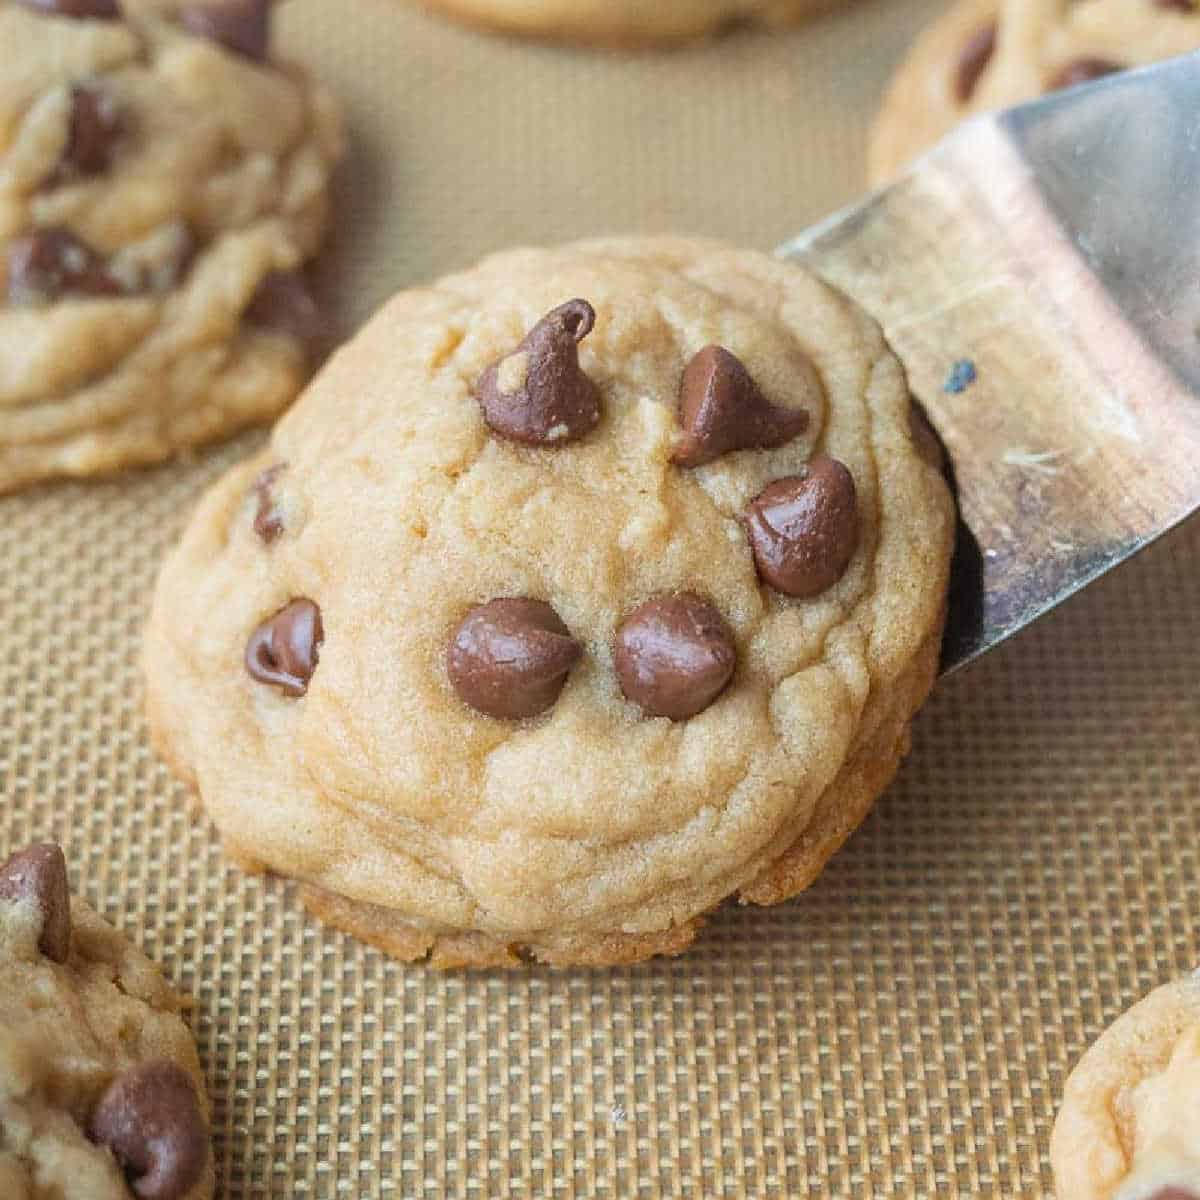 https://butteryourbiscuit.com/wp-content/uploads/2023/10/bakery-style-chocolate-chip-cookies-3.jpg